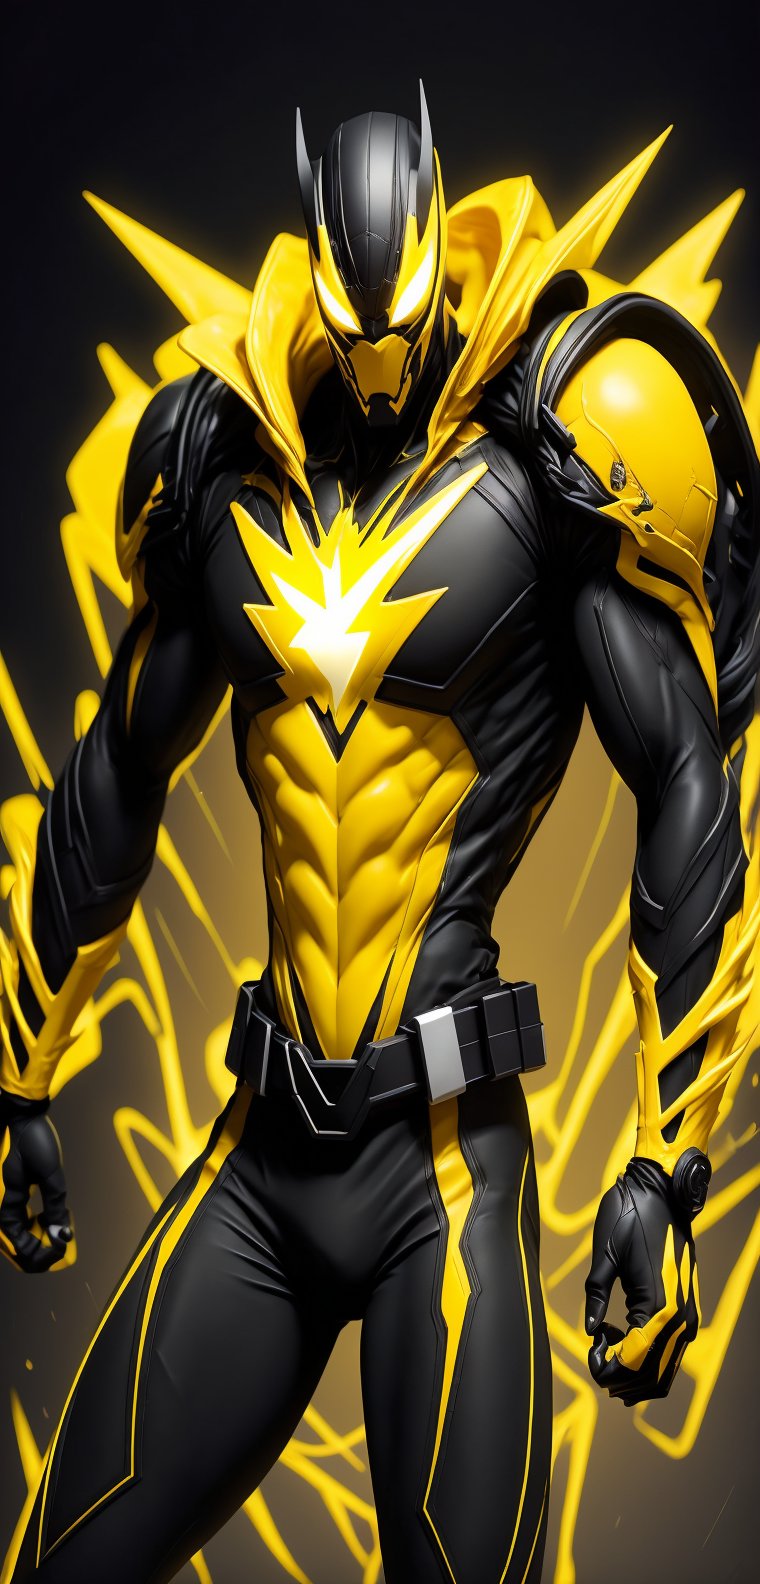 A speedster hero, with an imposing presence and athletic figure, stands in a ready-to-run stance. His suit is a vibrant mix of yellow and black, designed not only for speed but also protection and style. This hero, known as "Black Lightning", embodies the essence of speed and justice.
Mask: A tight-fitting mask covers your face, exposing only your eyes, nose, and mouth. The mask is black with yellow details around the eyes, forming a streamlined design that accentuates his penetrating and determined gaze.

Emblem: In the center of his chest, a stylized yellow lightning bolt emblem stands out against the black background of the suit. This emblem is the symbol of his heroic identity and his ability to move at superhuman speeds.

Upper: The upper part of the suit is primarily yellow with black details on the shoulders, arms and sides, providing a dynamic contrast that reflects his energy and speed. The suit's material is light but strong, designed to withstand the friction and heat generated by its rapid mobility.

Gloves: His gloves are black with yellow details on the fingers and wrists, providing a firm grip and protecting his hands during his missions.

Belt: A black belt cinched around your waist, with small compartments to hold useful devices and communication tools.

Bottom: The pants of the suit are black with yellow details on the sides, continuing the streamlined design and ensuring flexibility and comfort. The boots, also black with yellow lightning bolts, are designed for maximum traction and durability, with reinforced soles to absorb the impact of your fast runs.
In full motion, Black Lightning is a blurry figure to the human eye. The energy of their movements is perceived as flashes of yellow light and black shadows that mark their path. His speed is amazing, capable of overcoming any obstacle in the blink of an eye. The speed lines that follow him highlight his ability to move through time and space with unmatched precision.